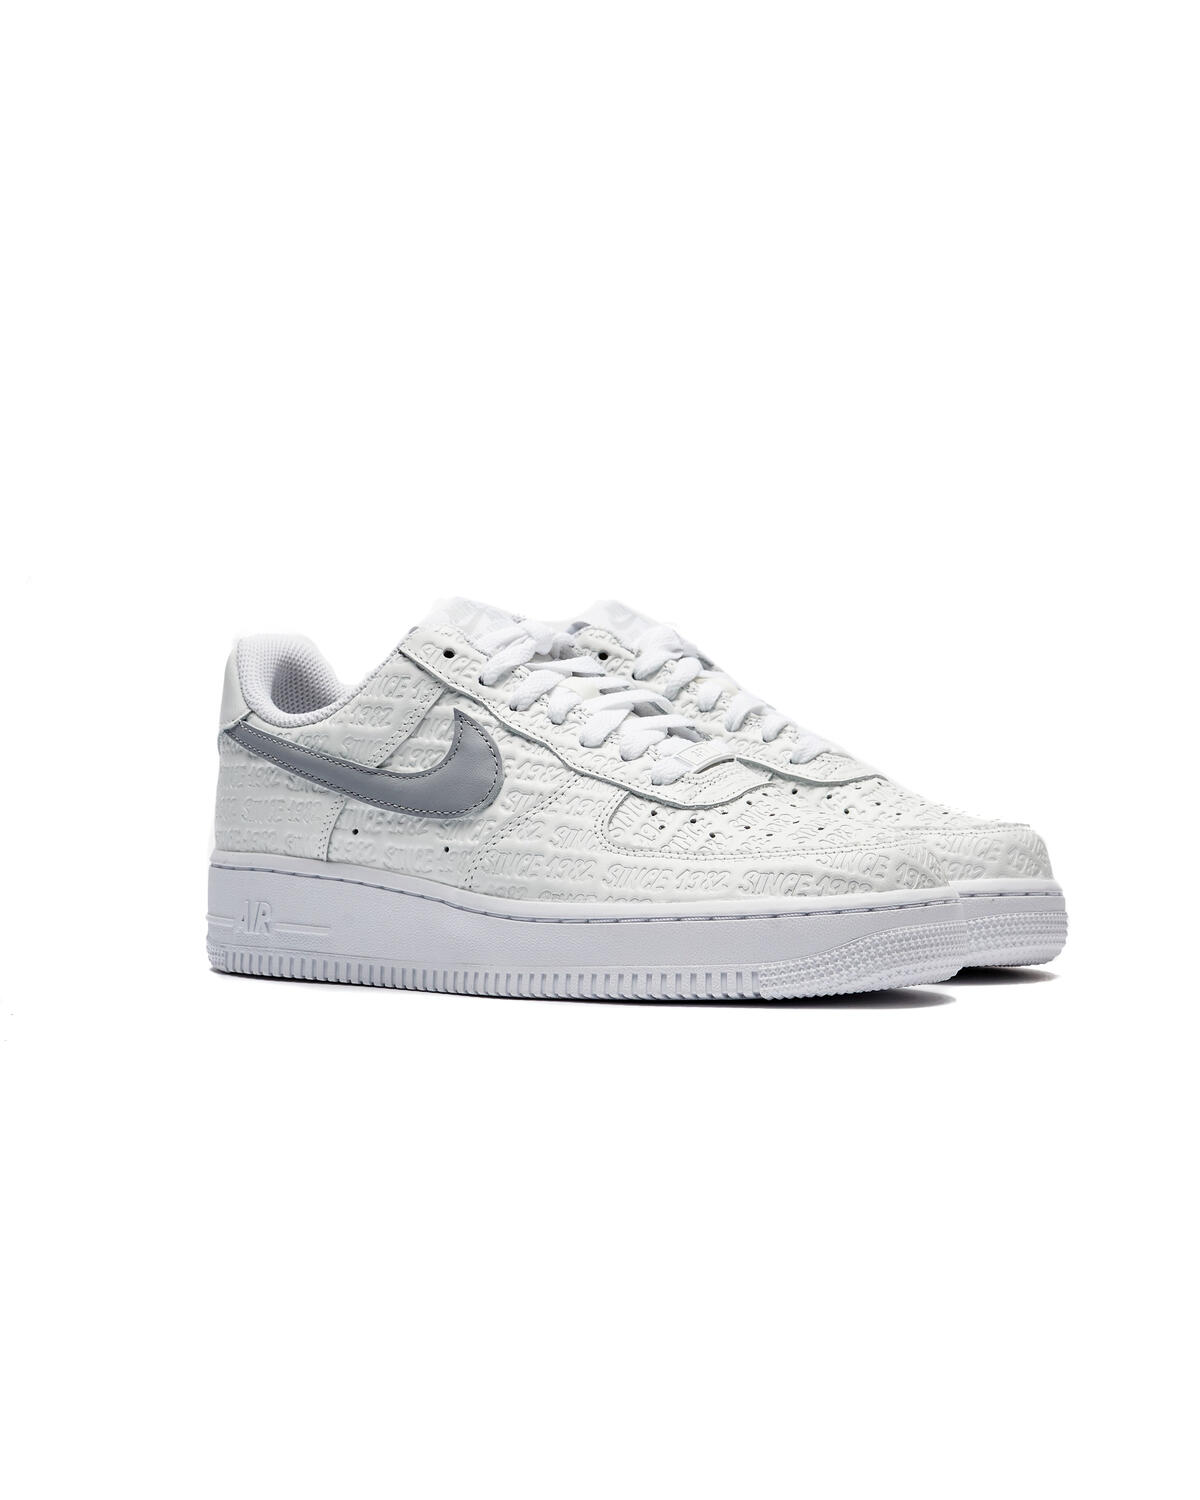 Nike Air Force 1 '07 Low SUMMIT WHITE/WOLF GREY-WHITE